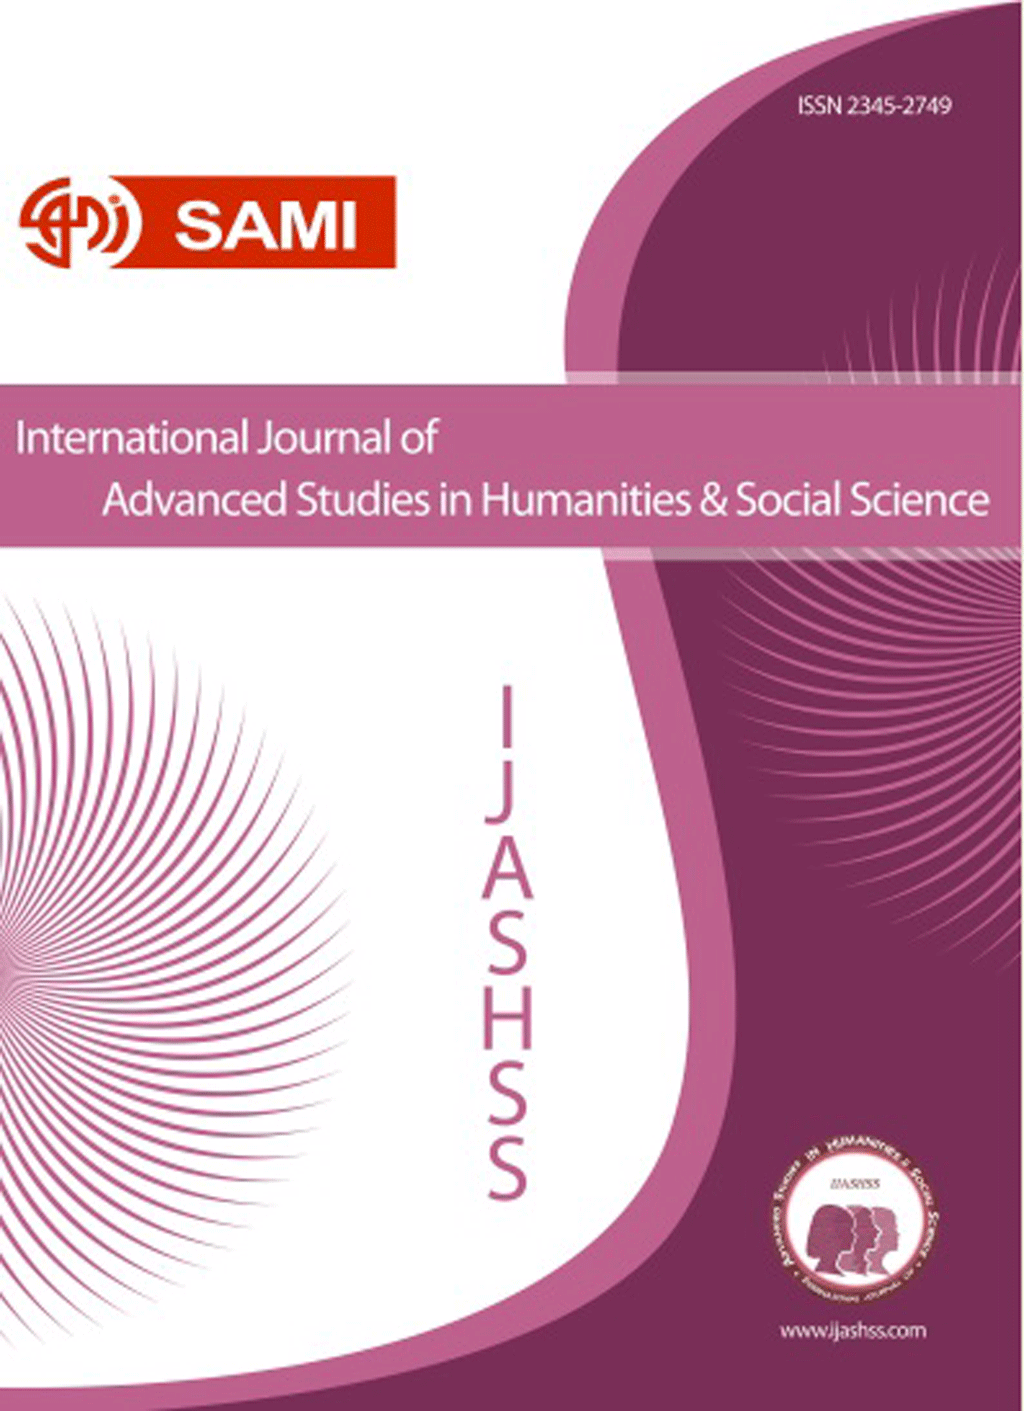 International Journal of Advanced Studies in Humanities and Social Science - July 2014, Volume 3 - Issue 3